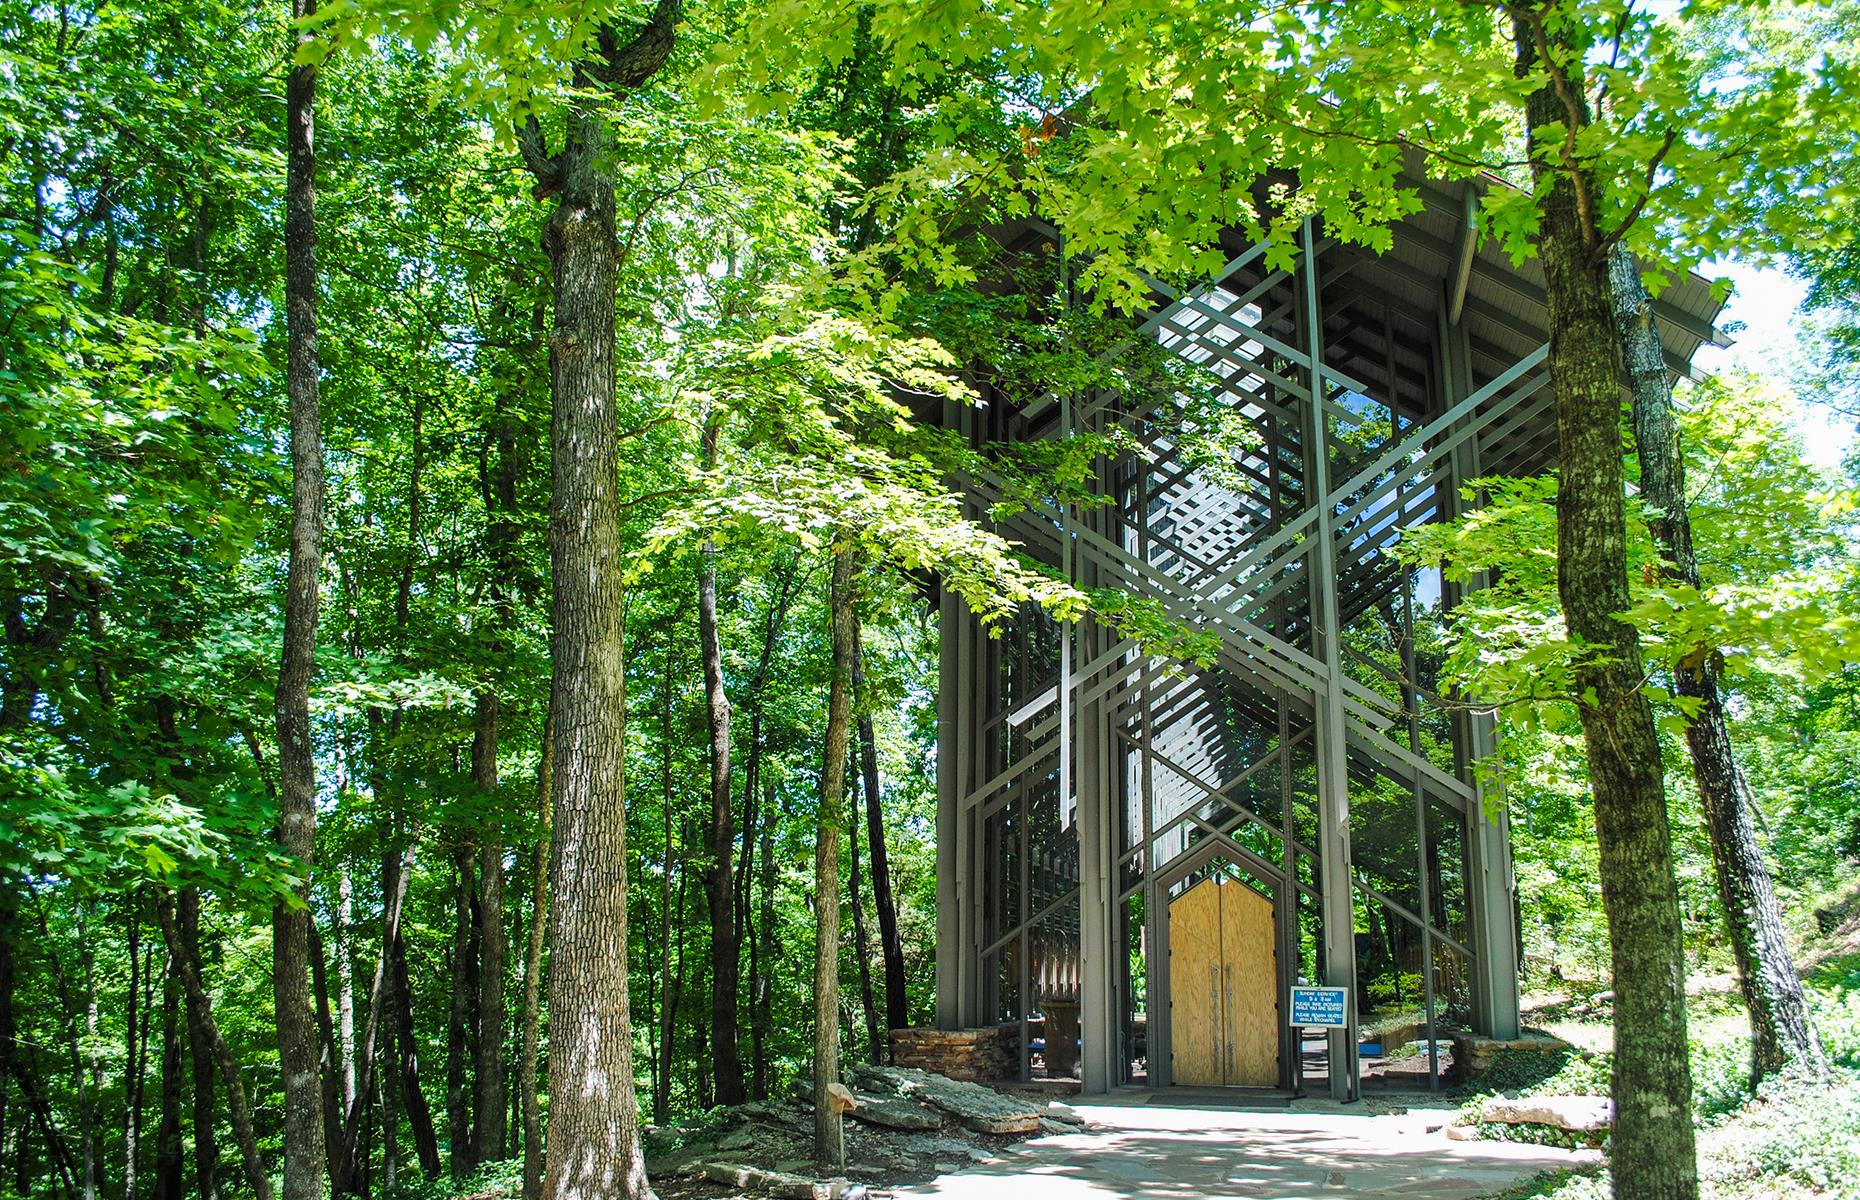 Inspired by Frank Lloyd Wright's Prairie School architecture, the 1980-built Thorncrown Chapel appears to be at one with its natural Ozarks surroundings. It's known for its eye-catching appearance, which features 425 windows set into a wooden frame, and was designed by architect Euine Fay Jones to reflect the landscape. That abundance of glass gives it a spacious, open-air feel.